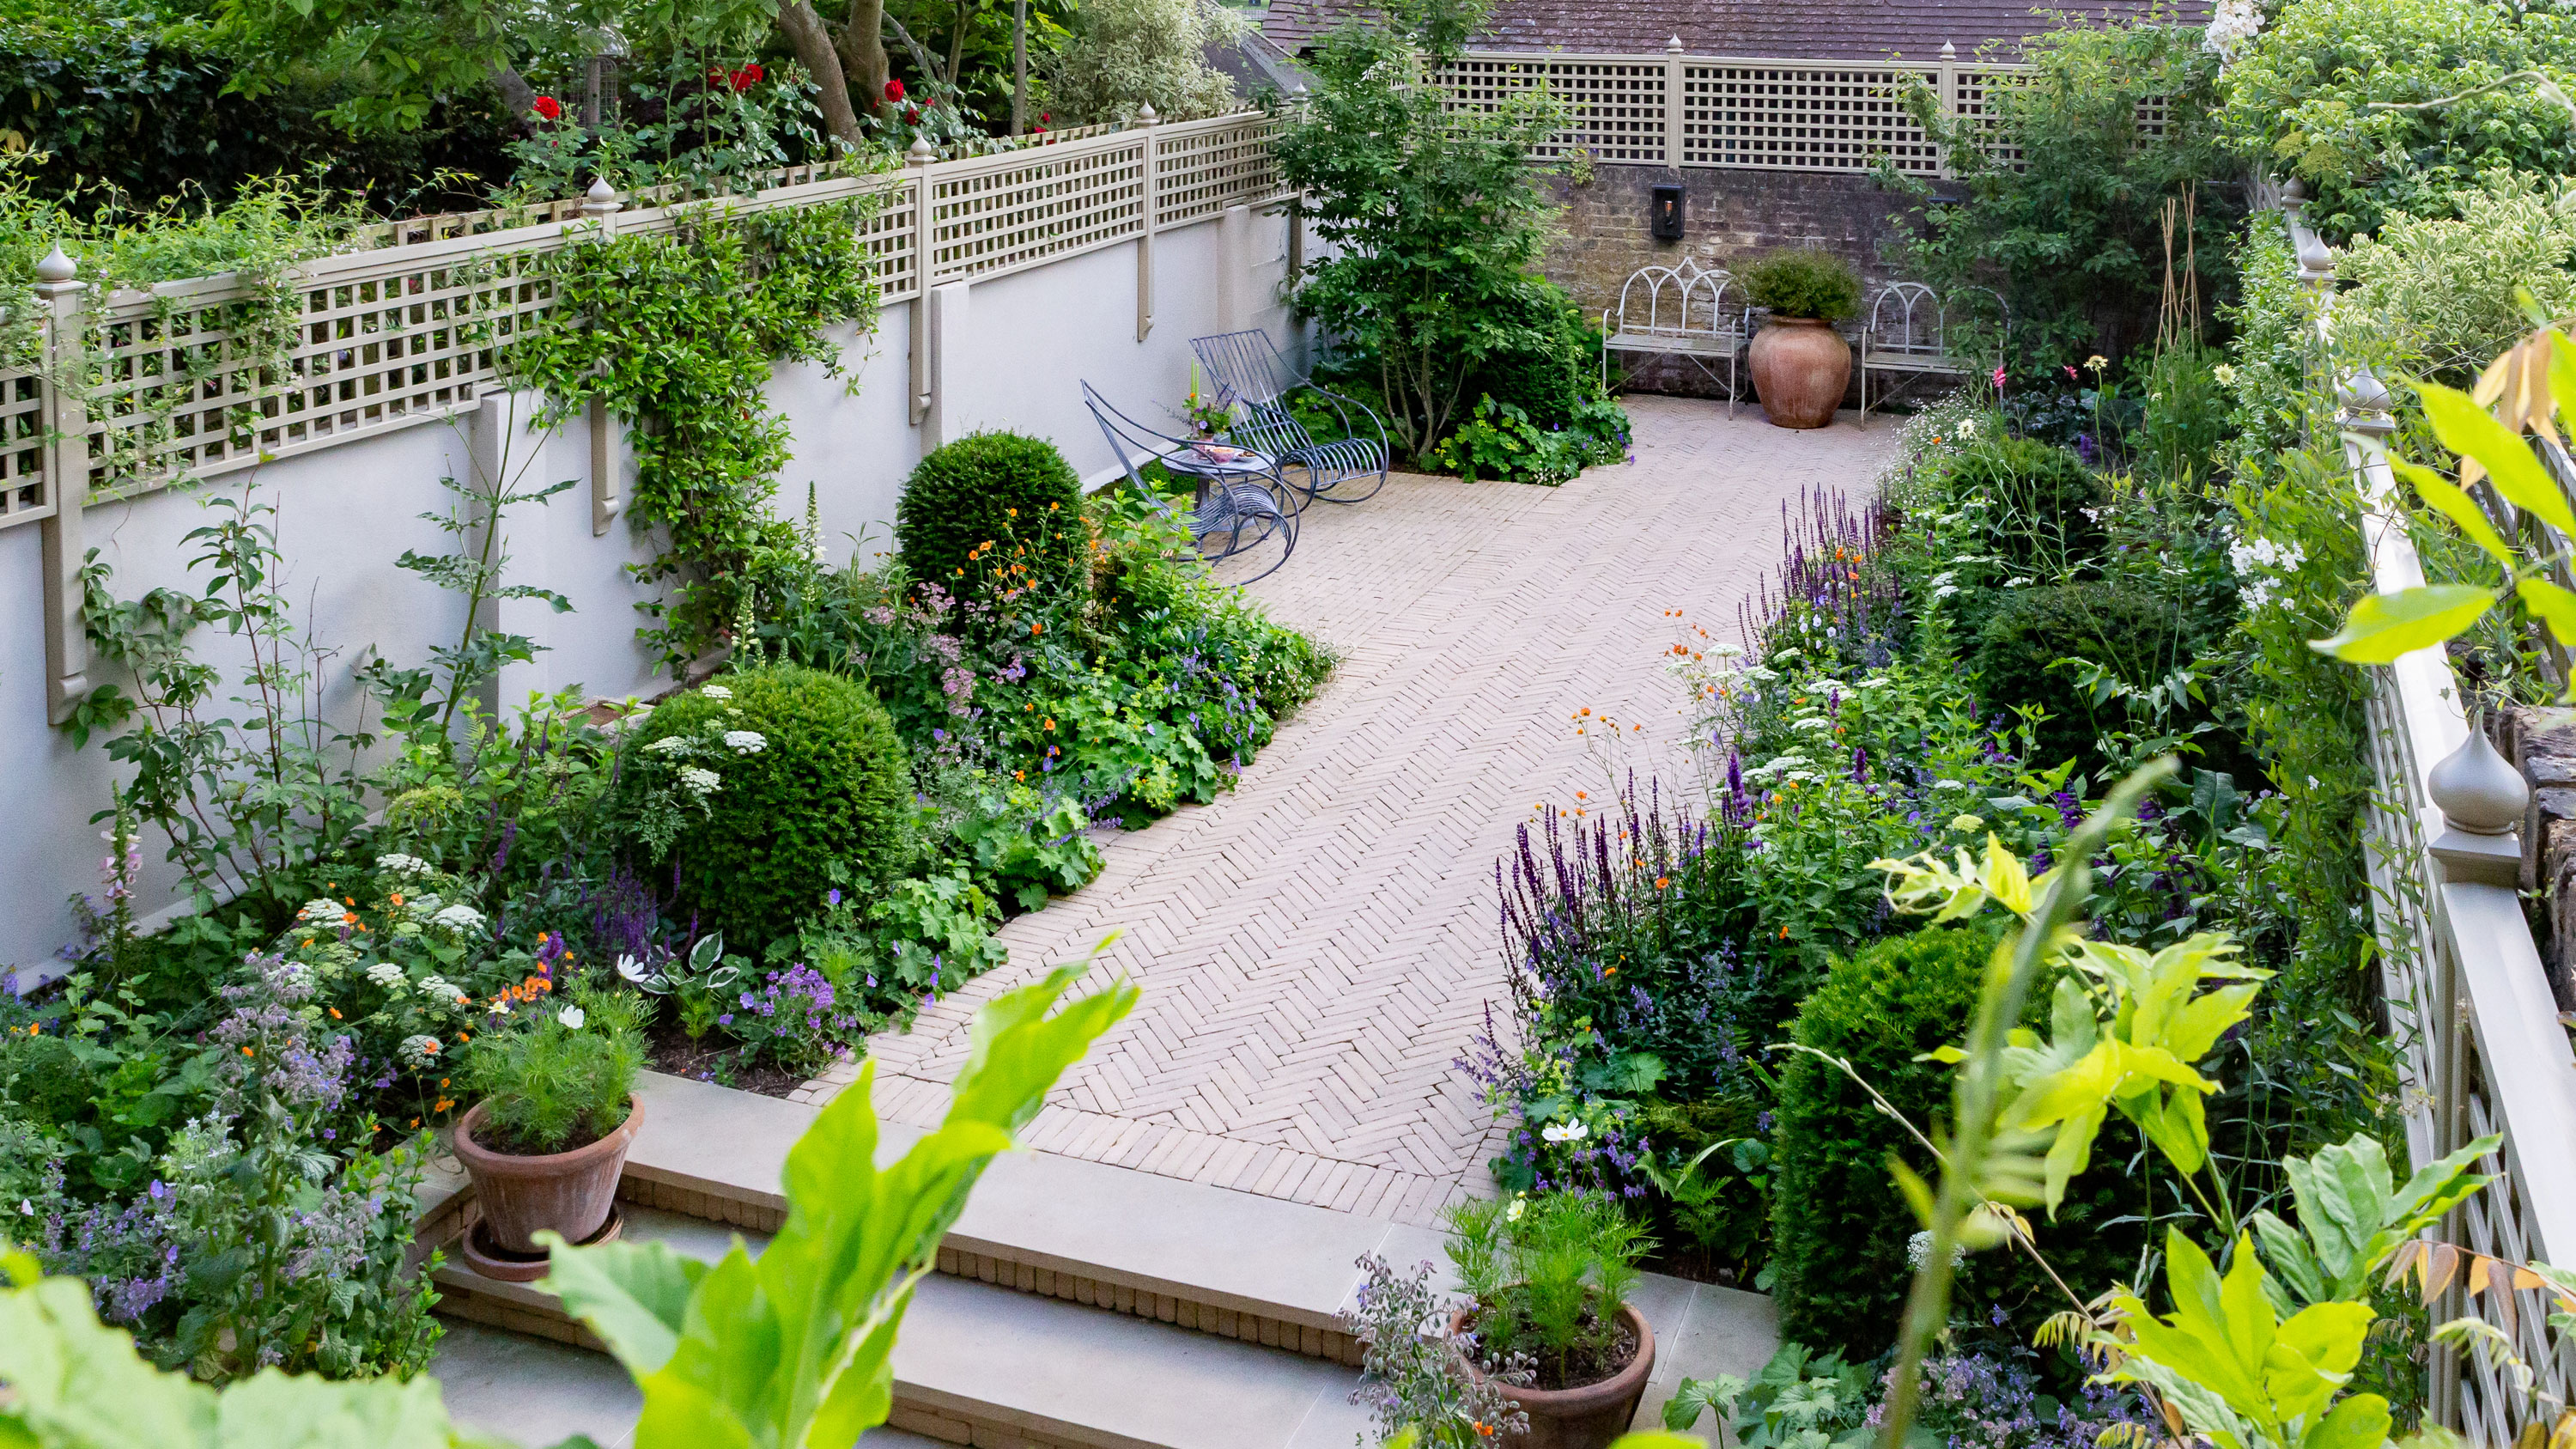 5 design ideas to inspire from this narrow and small garden | Homes &  Gardens |